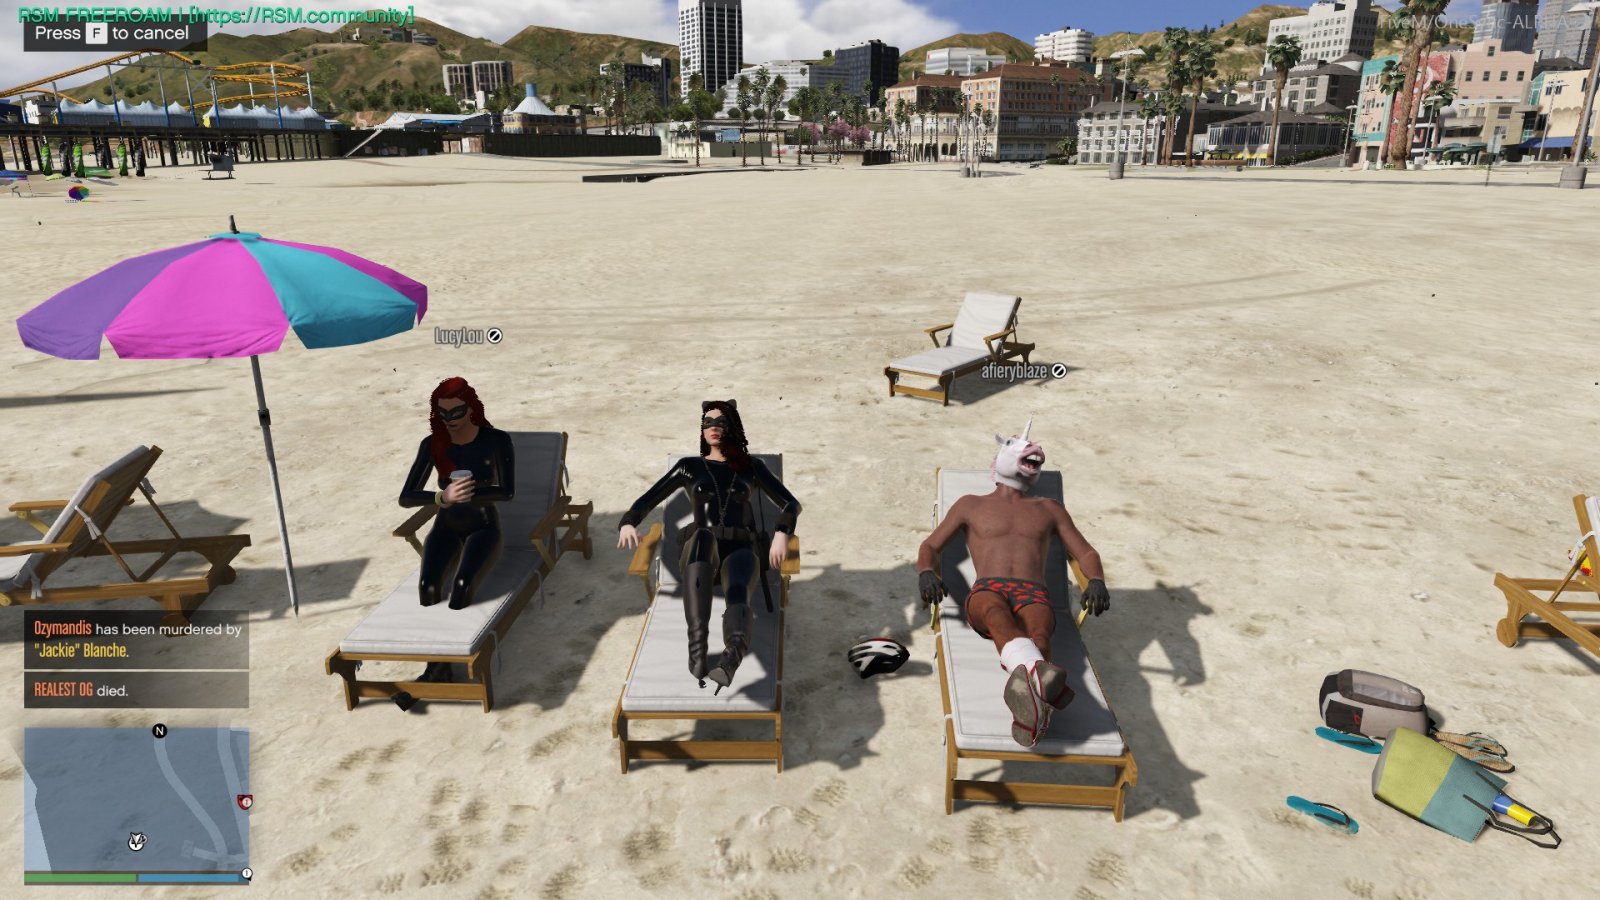 Relaxing at the beach with 2 catgirls and 1 horse